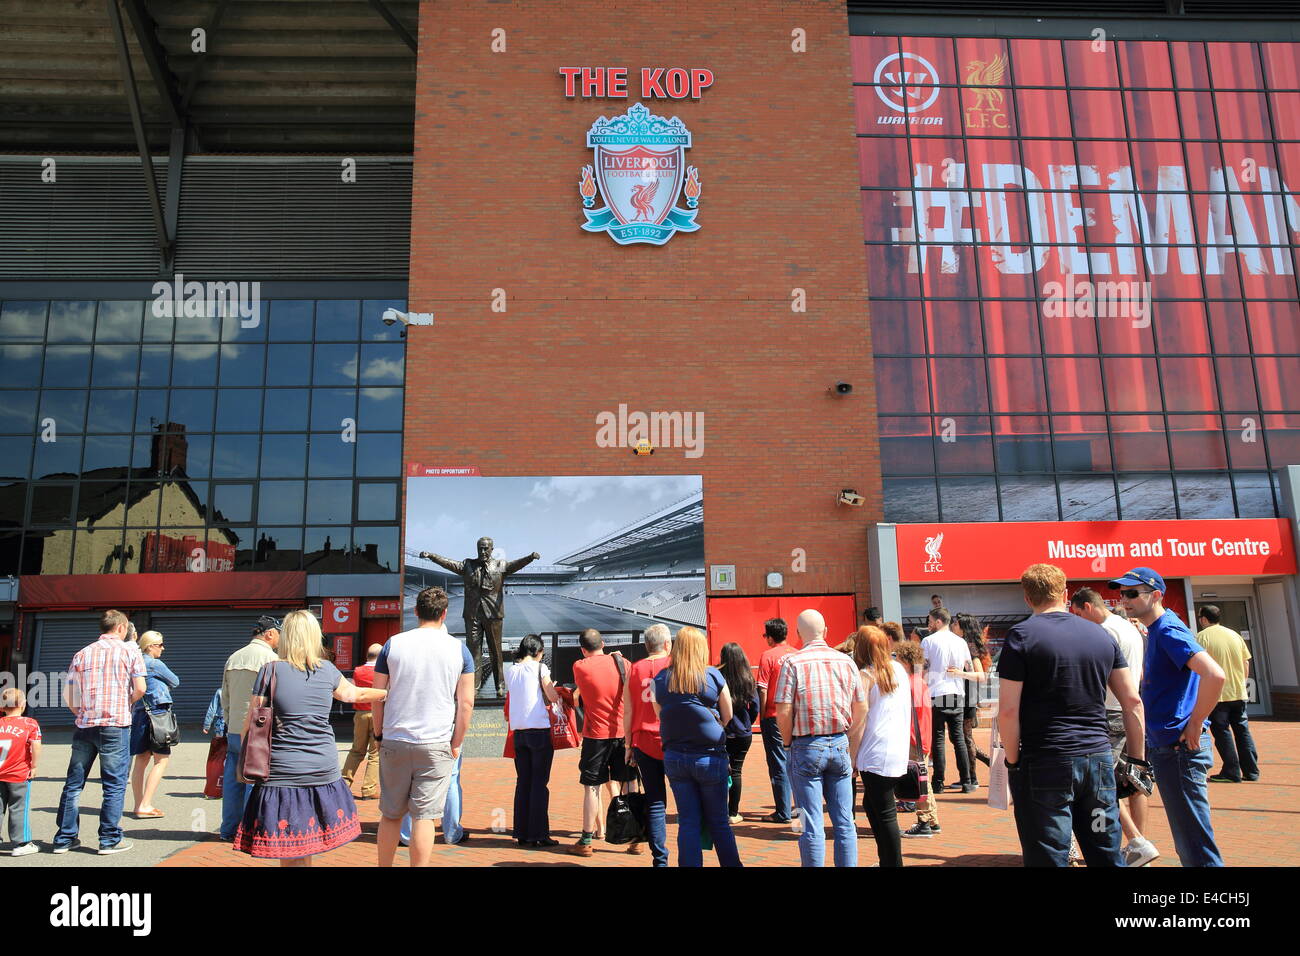 The Bill Shankly statue in front of the Kop, at Anfield, Liverpool Football Stadium, at the start of the stadium tours. Stock Photo